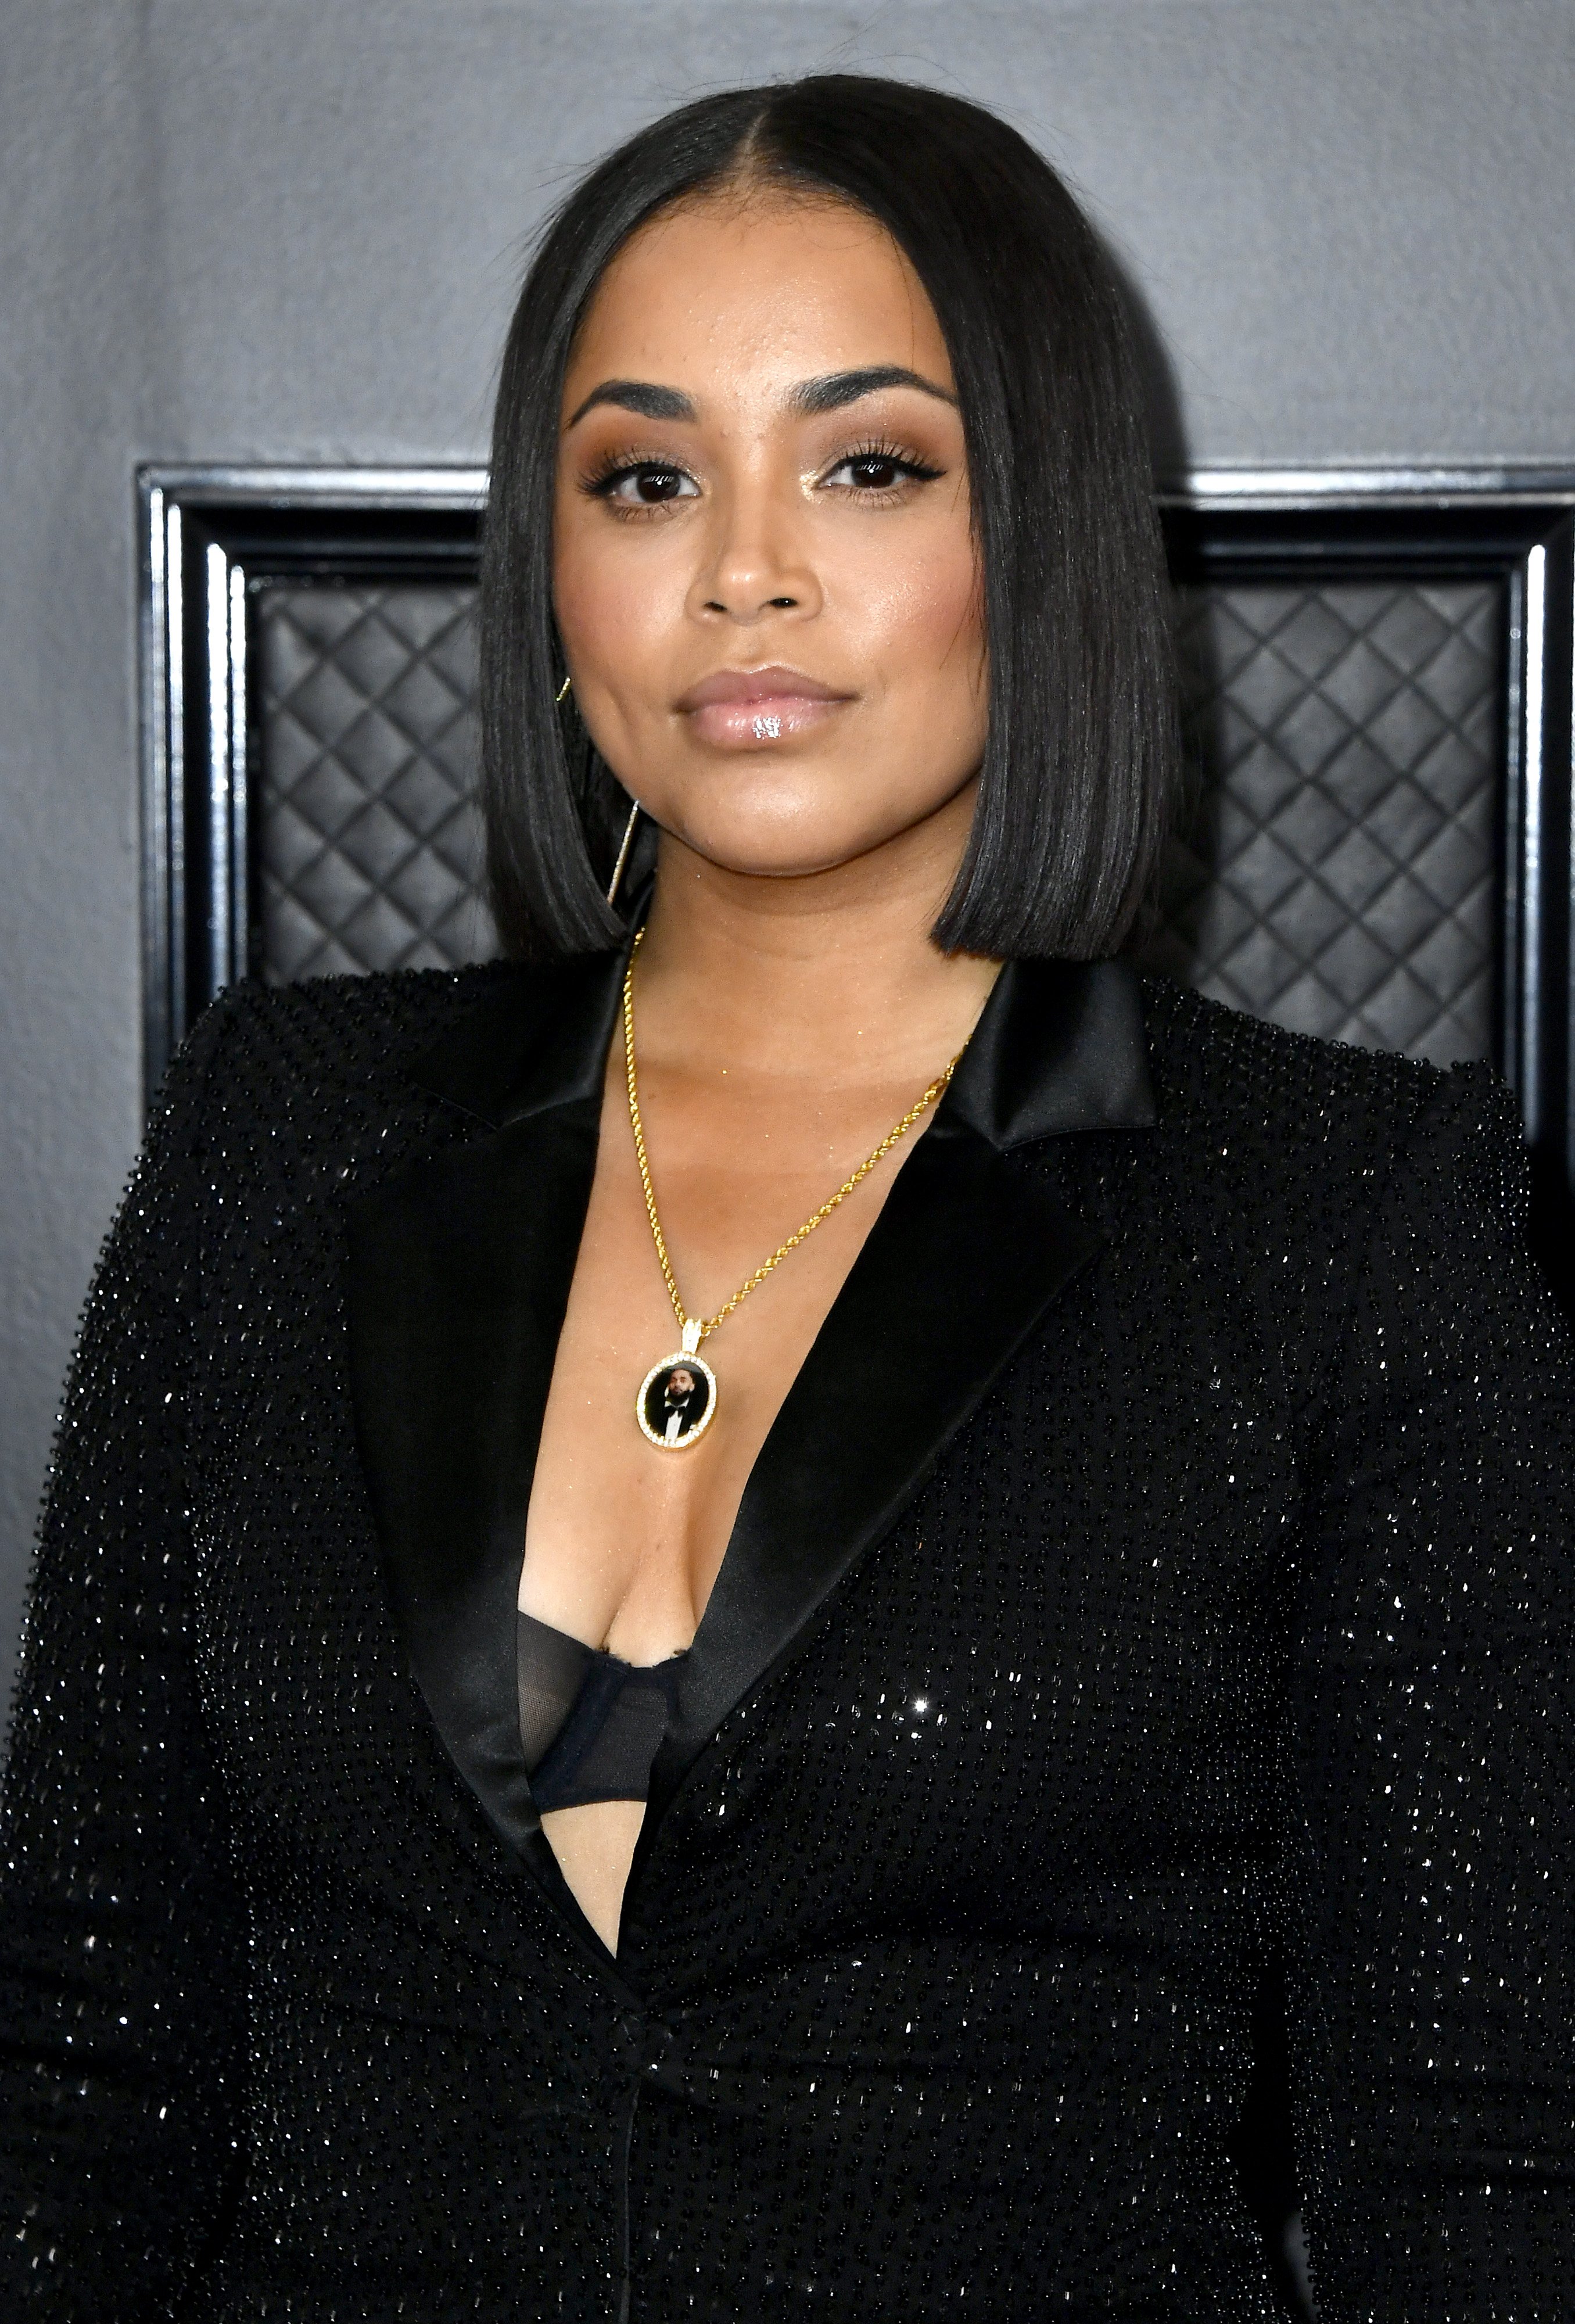 Lauren London pictured at the 62nd Annual Grammy Awards in California on January 26, 2020. | Photo: Getty Images